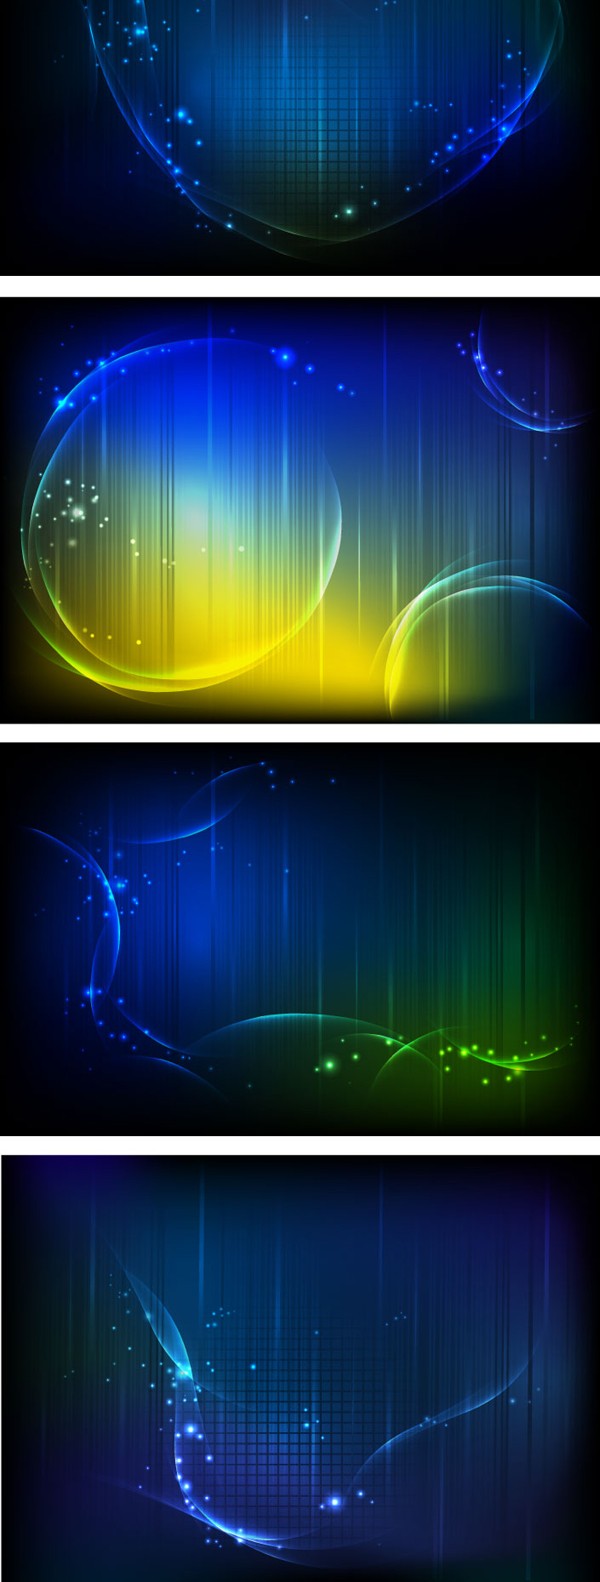 Dream blue light backgrounds vector free download